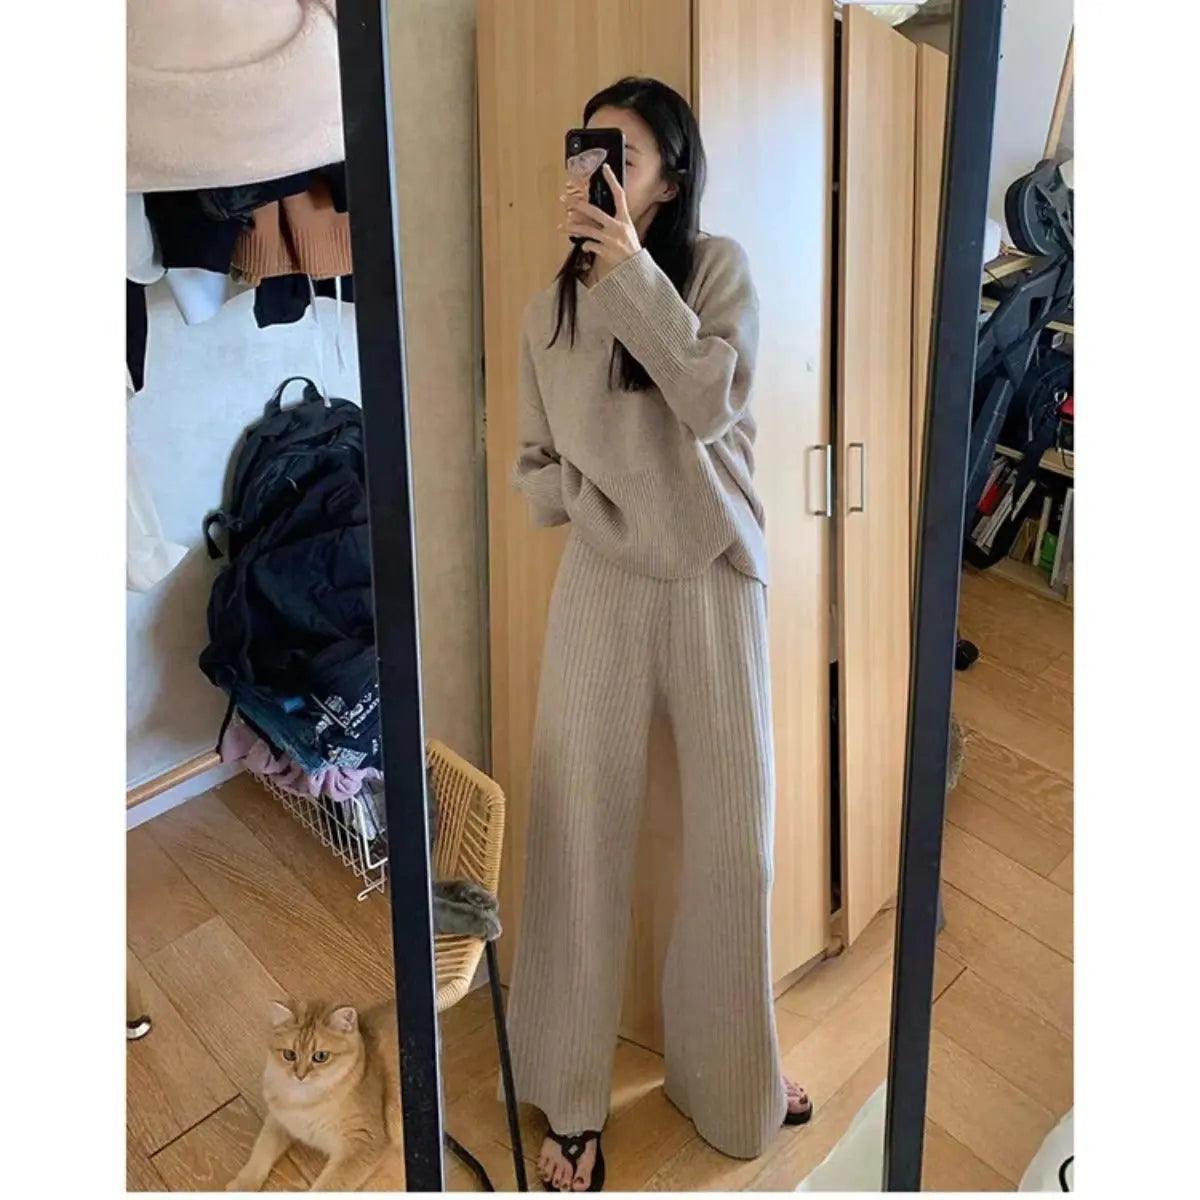 MS019 2 Piece Outfits Sweater High Waist Wide Leg Pants And Long Sleeve Knit V Neck Pullover - Mariam's Collection